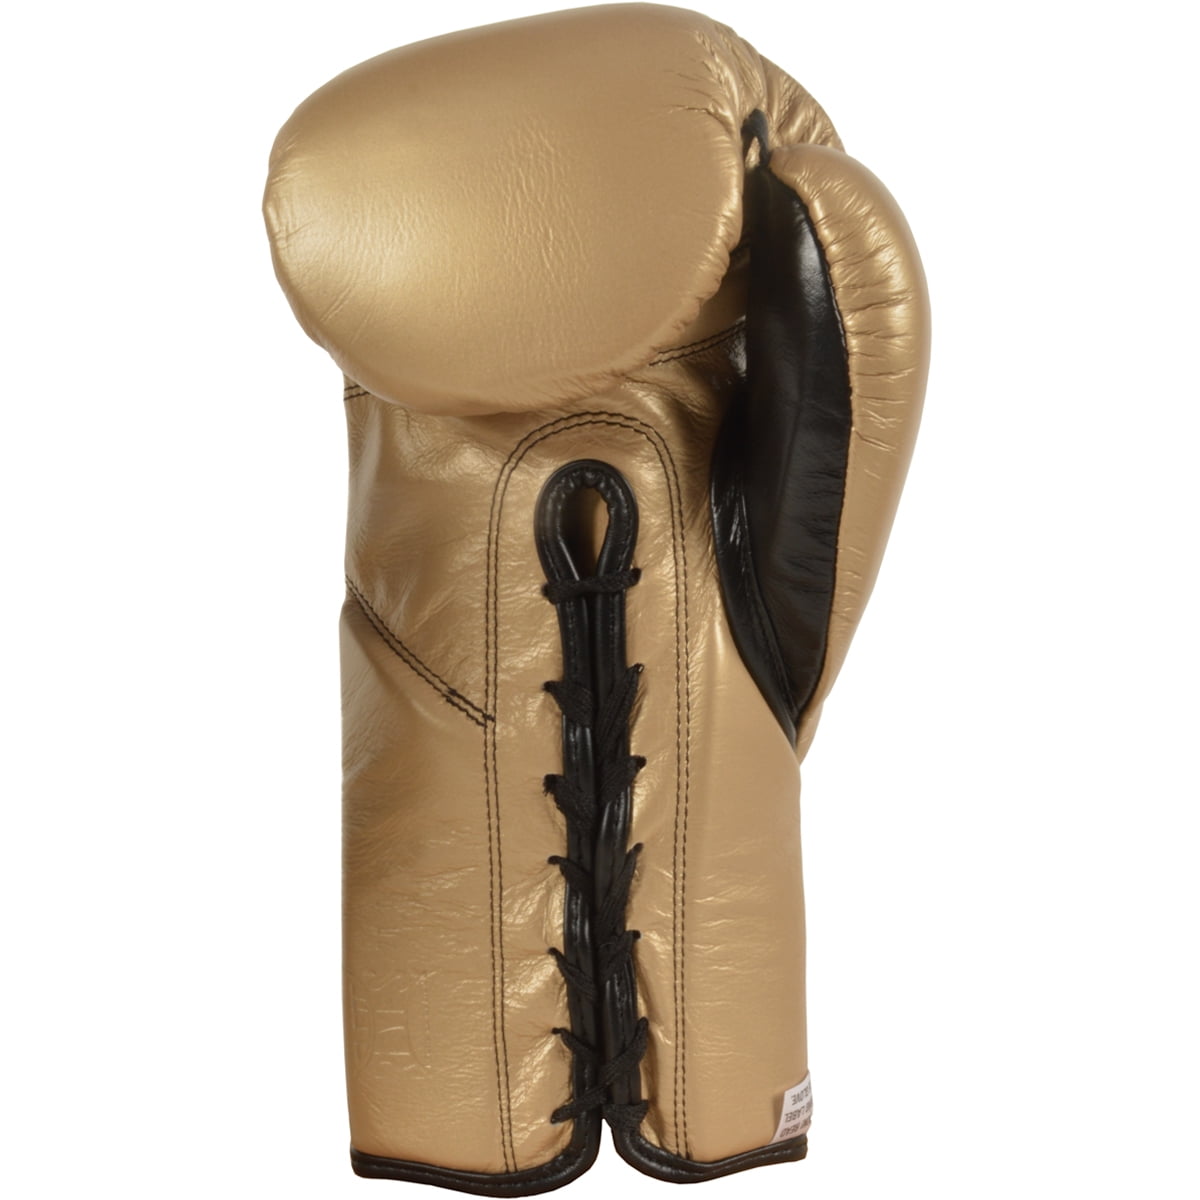 Solid Gold Cleto Reyes Official Lace Up Competition Boxing Gloves 